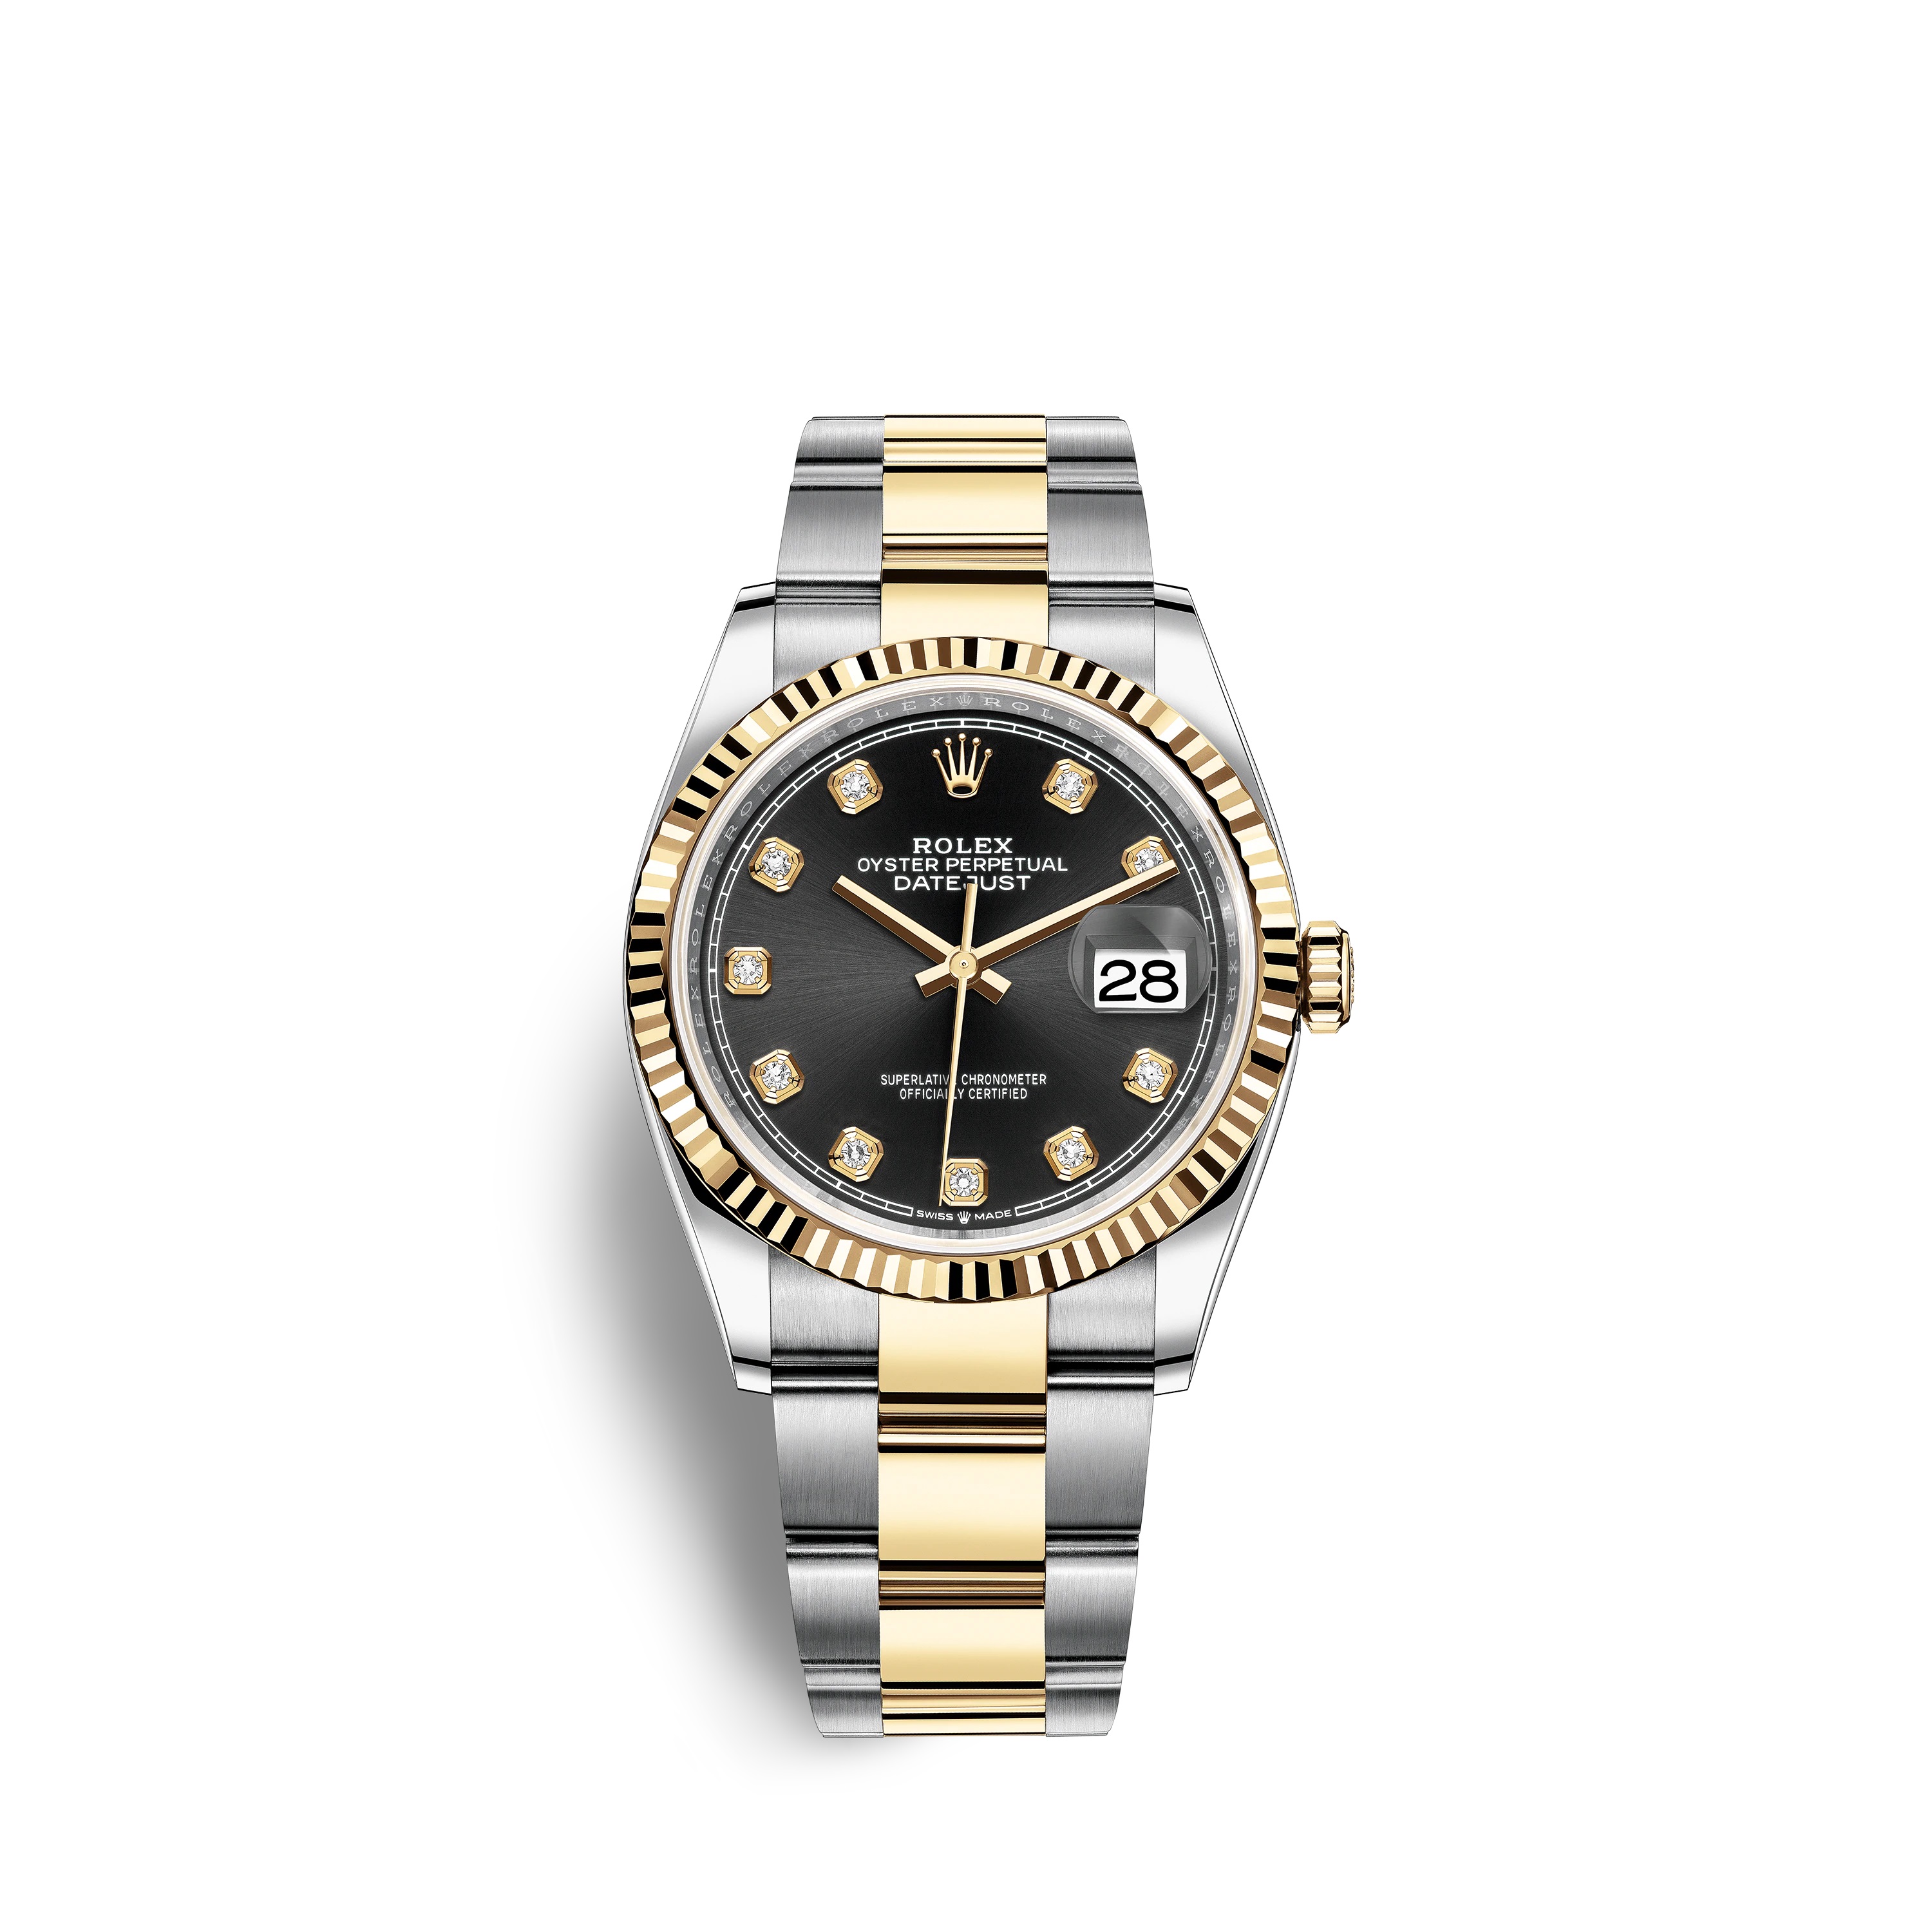 Datejust 36 126233 Gold & Stainless Steel Watch (Black Set with Diamonds)